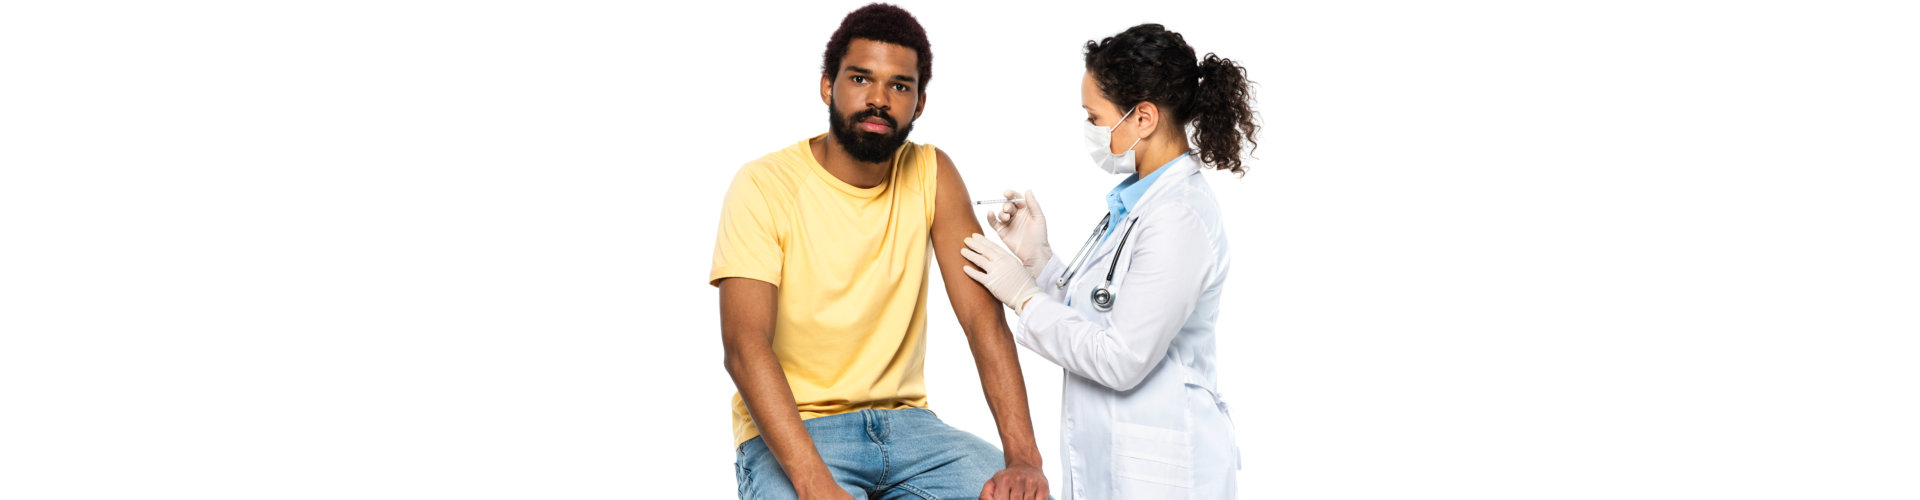 African american doctor doing injection